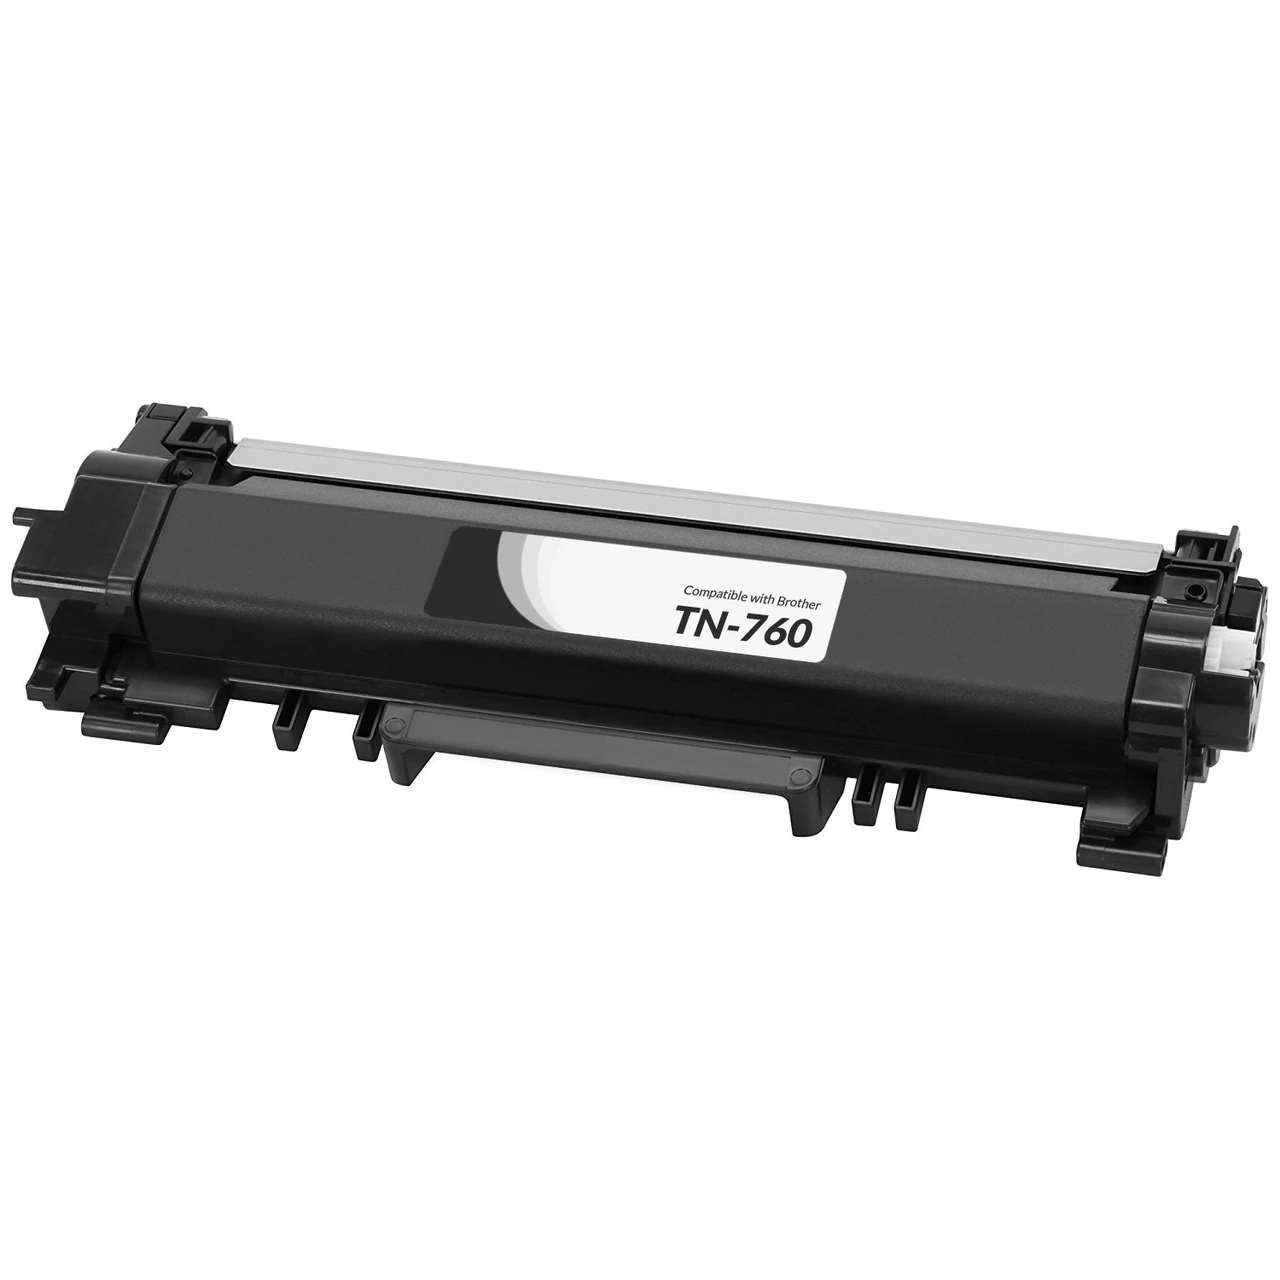 Brother TN760 Compatible Black Toner Cartridge, High Yield, 3,000 Page Yield